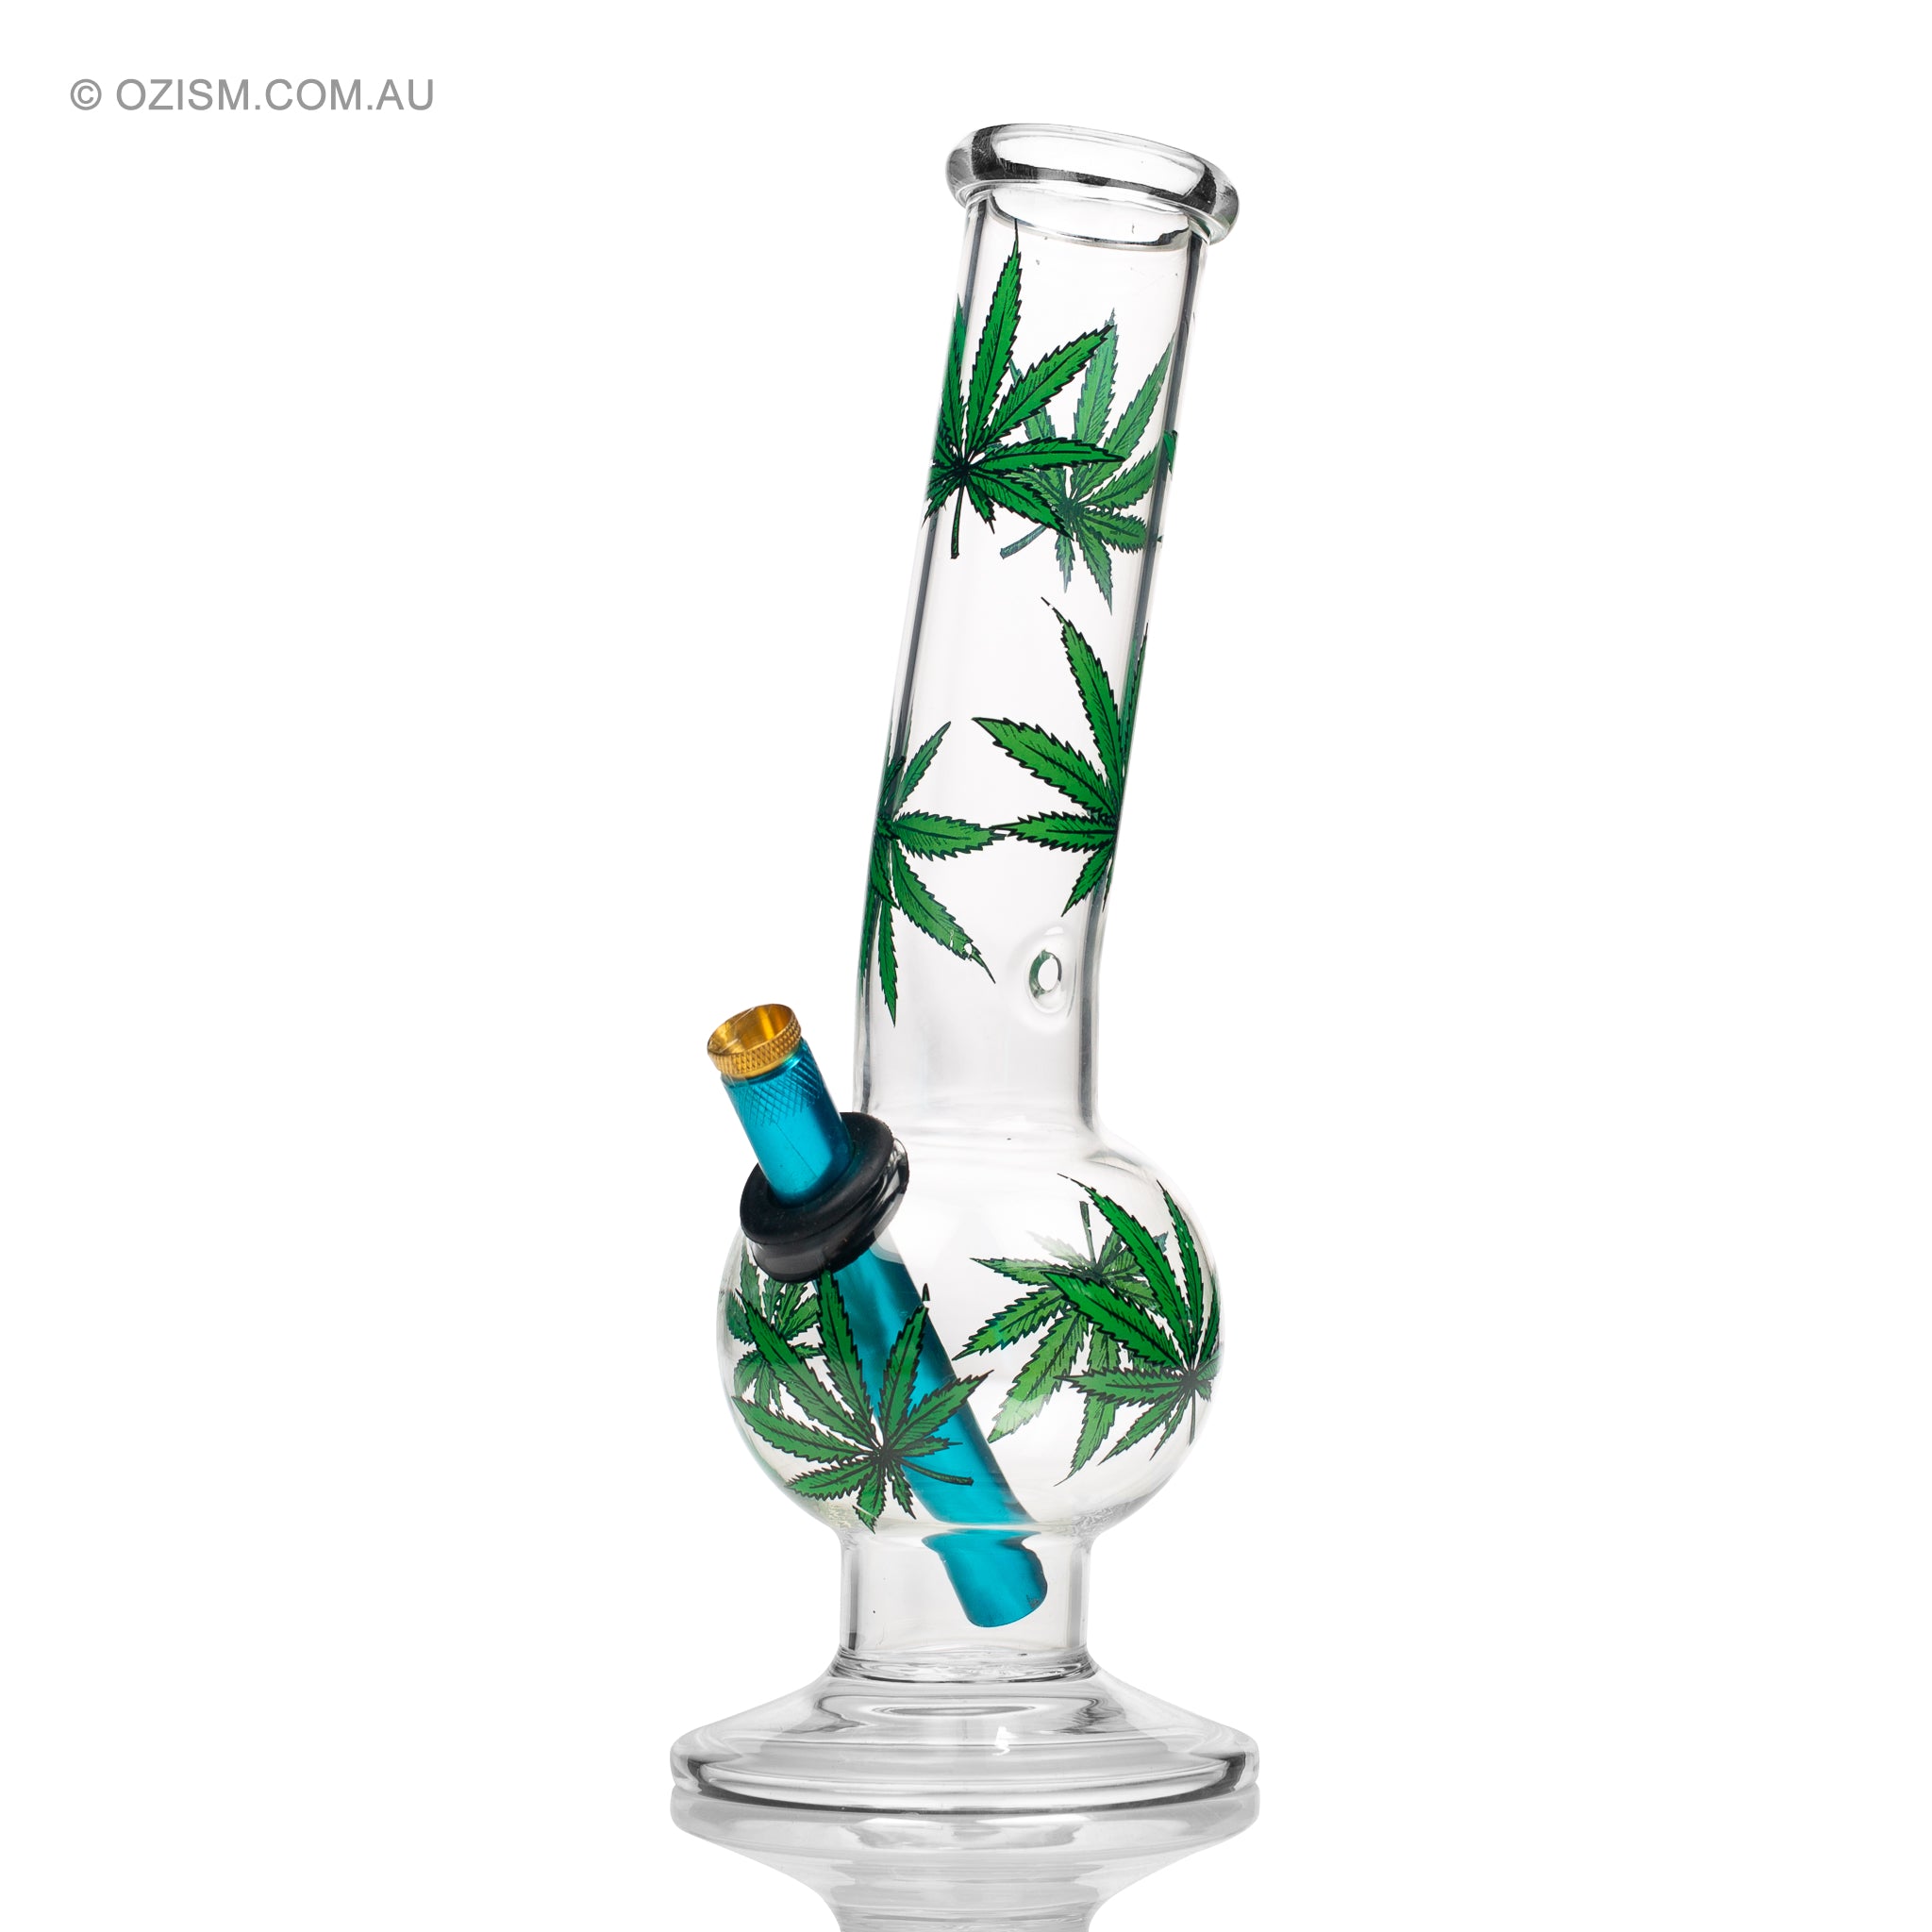 MWP aussie style glass bong for use with medical cannabis.